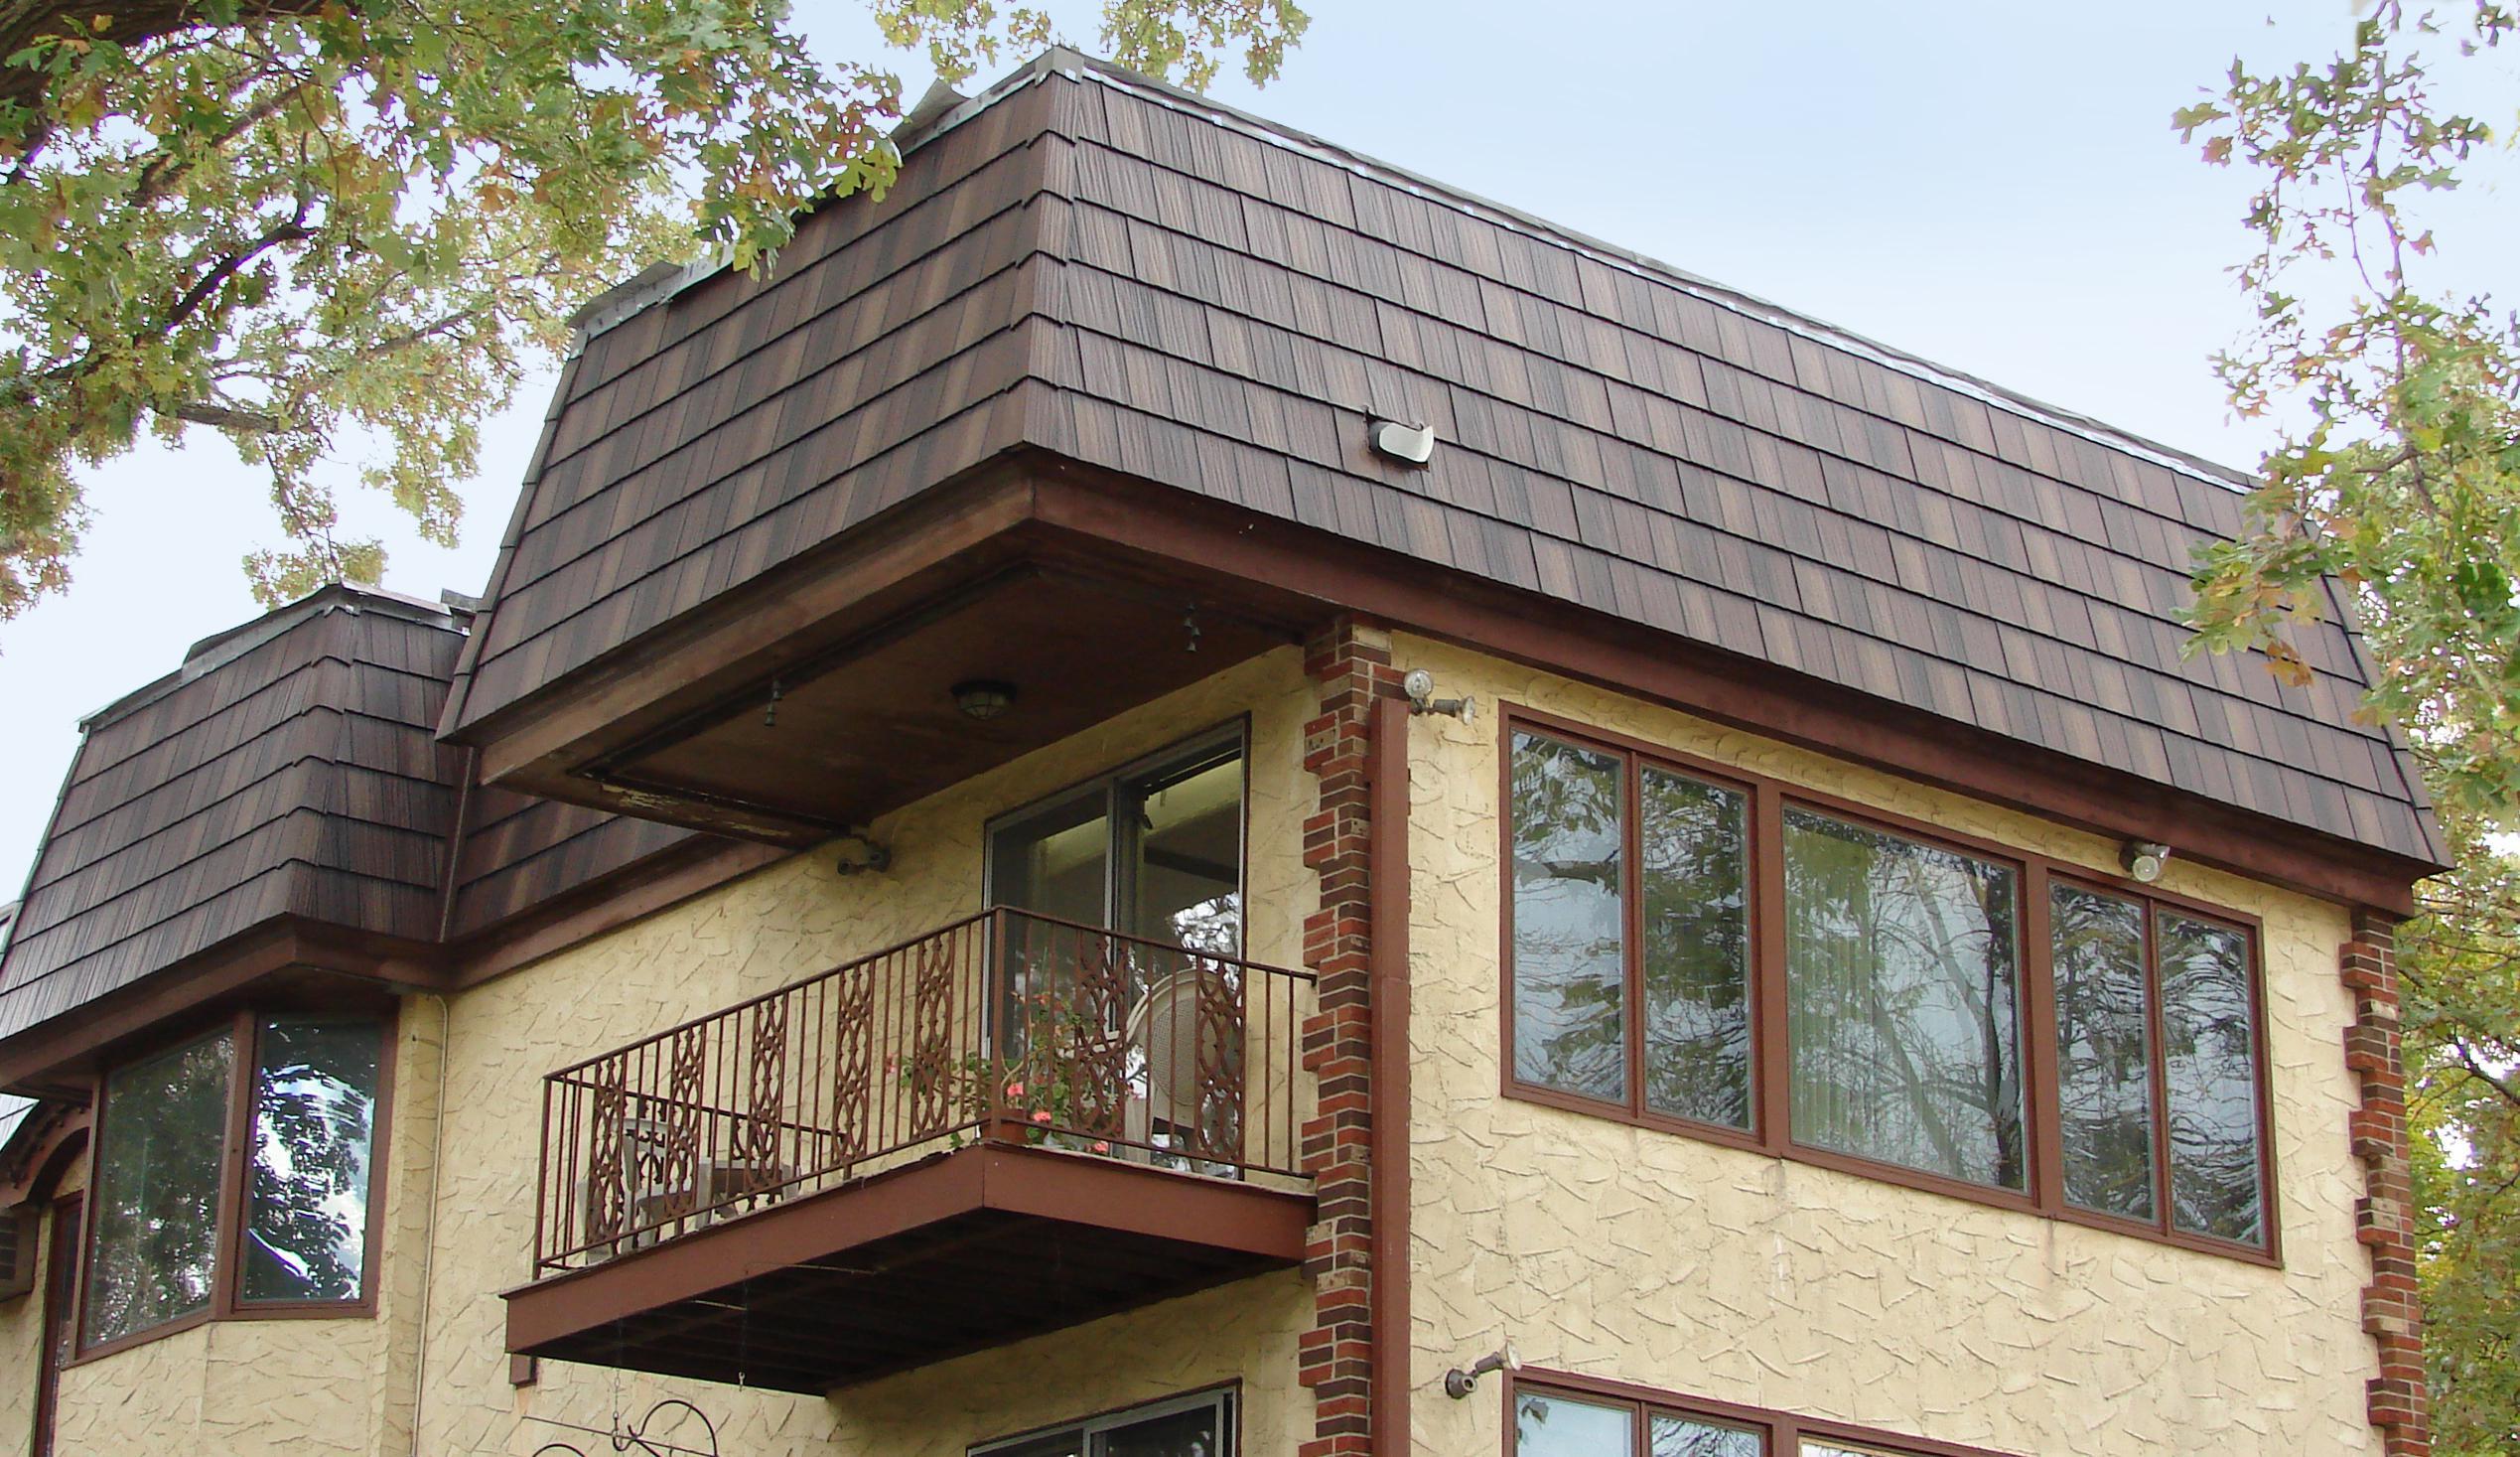 Arrowline Shake Enhanced Royal Brown Blend was selected and installed during a remodel project to capture the charm of the building while protecting the investment for a lifetime.